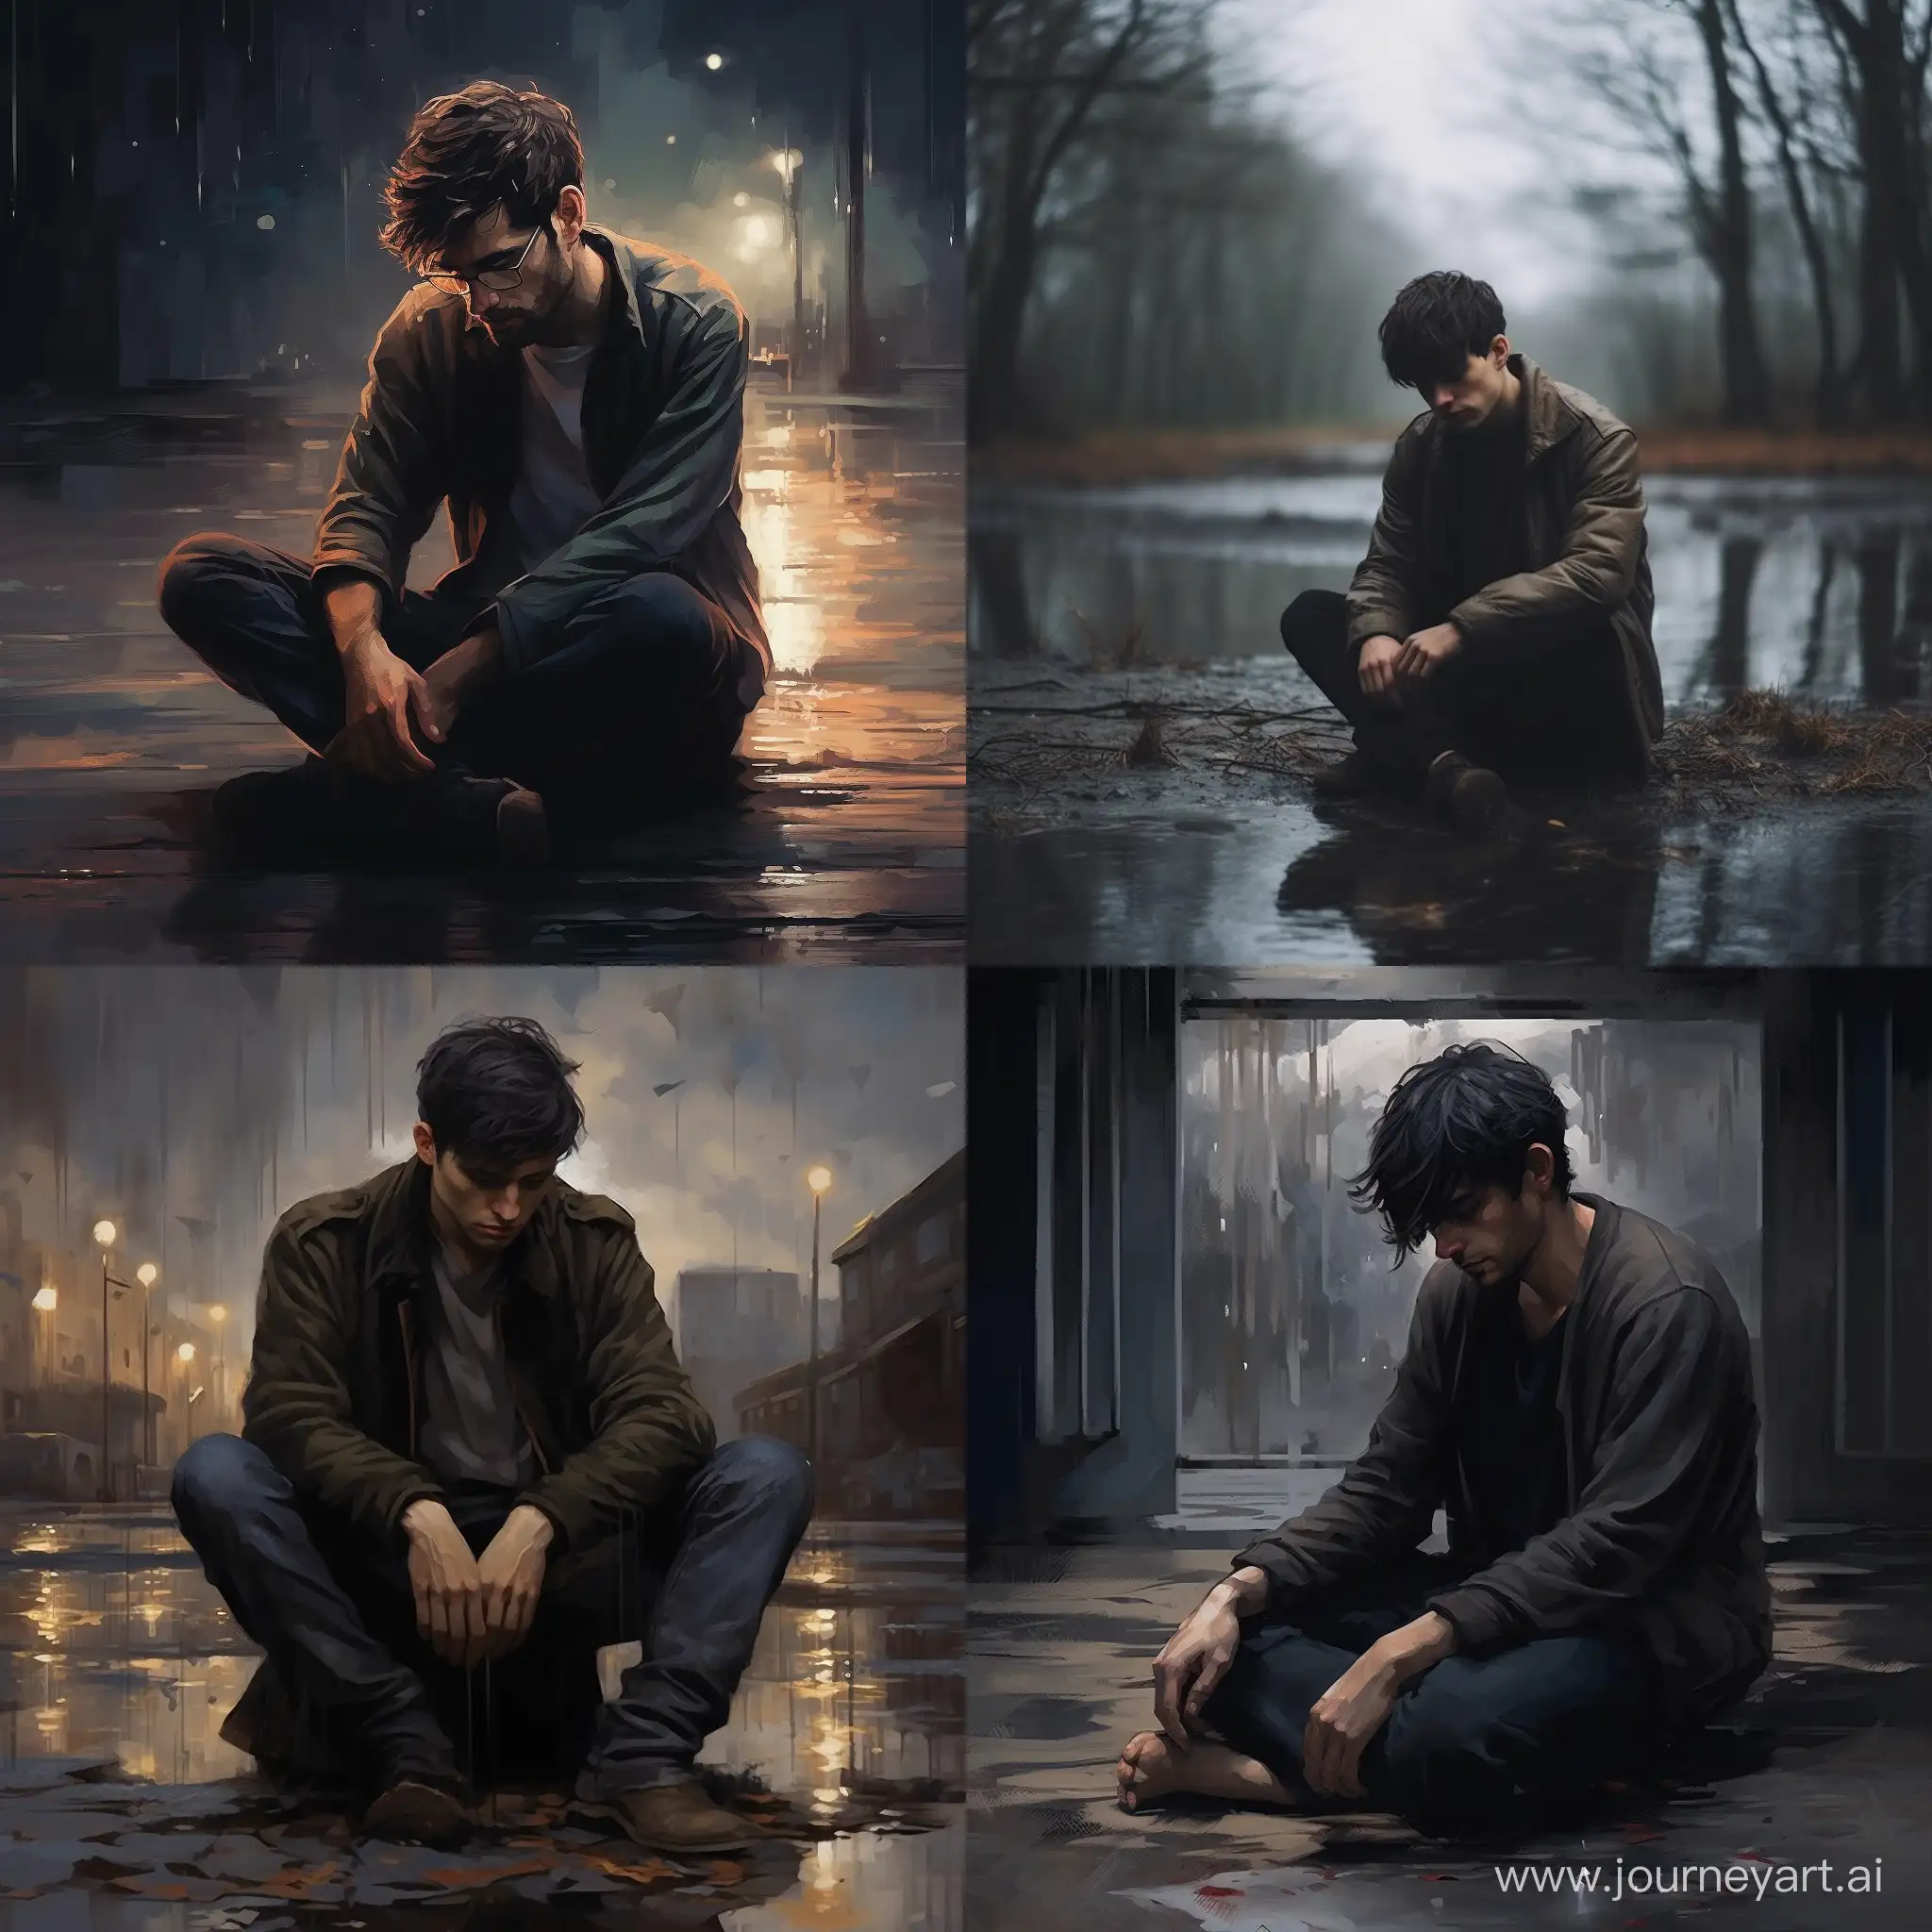 Lonely-Man-in-Despair-Emotional-Solitude-and-Hopelessness